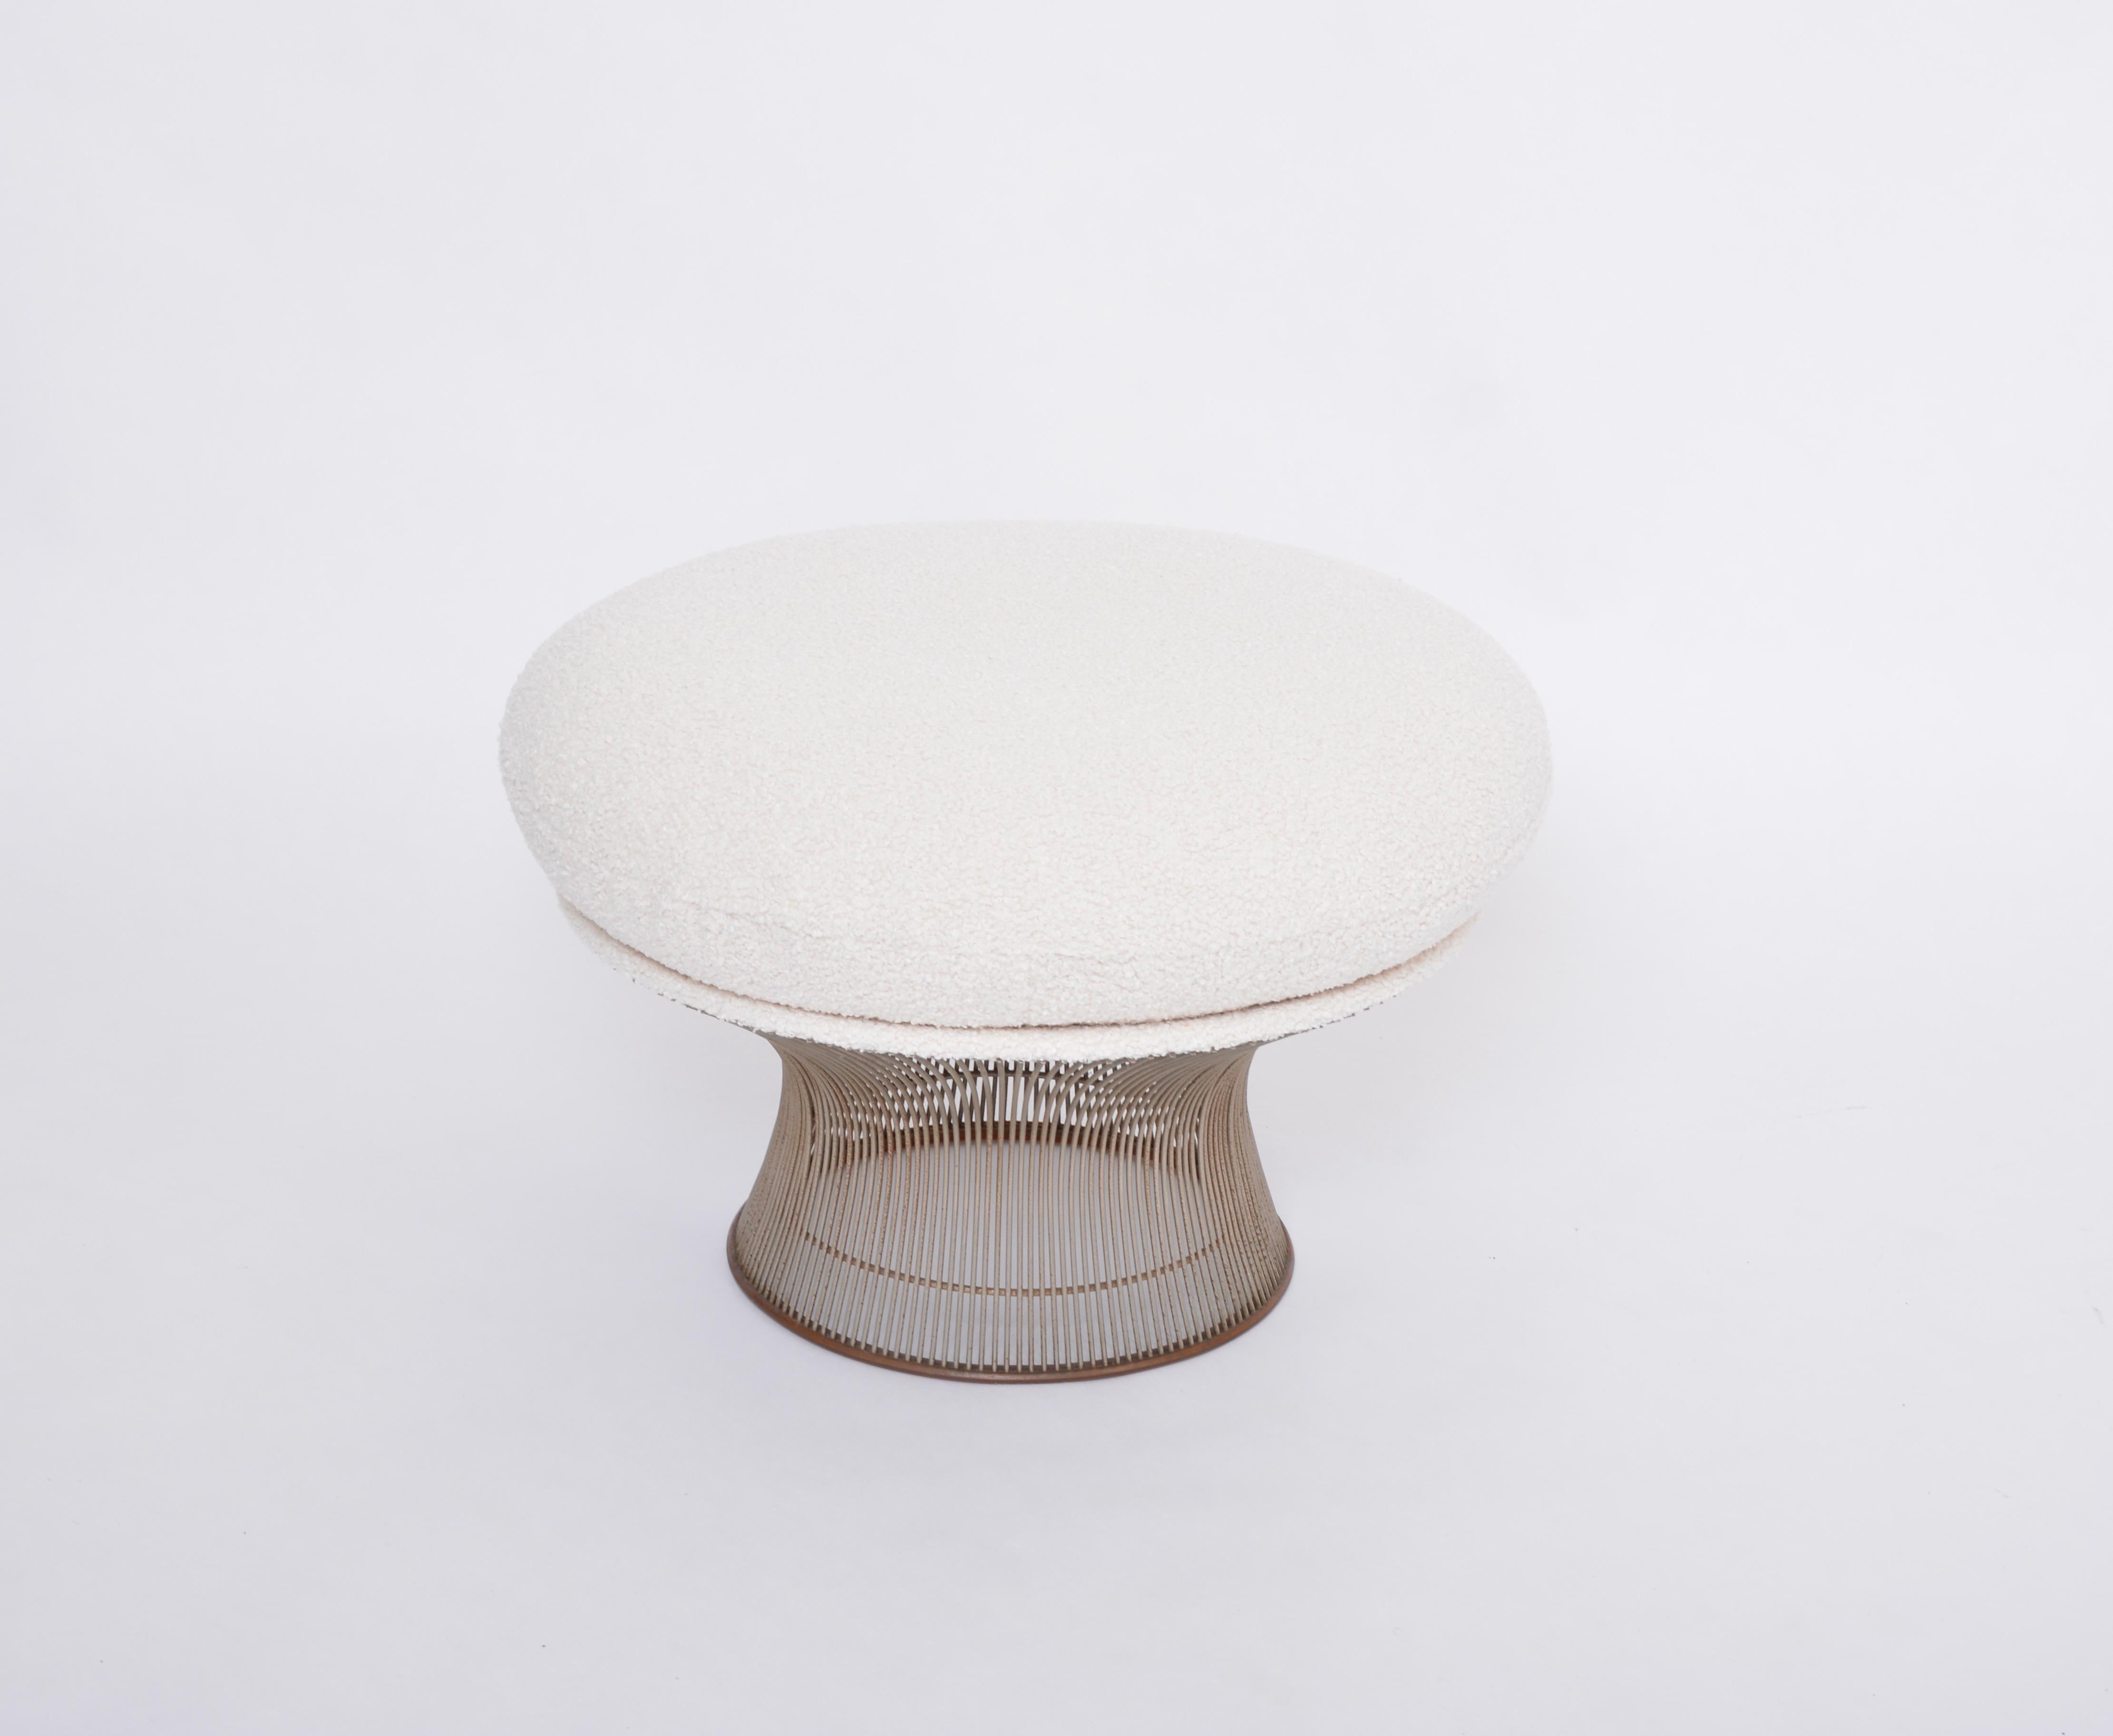 White reupholstered vintage Mid-century ottoman by Warren Platner for Knoll, two ottomans available
In 1966, Warren Platner designed his now iconic collection of pieces of furniture for Knoll that have become the embodiment of timeless mid-century